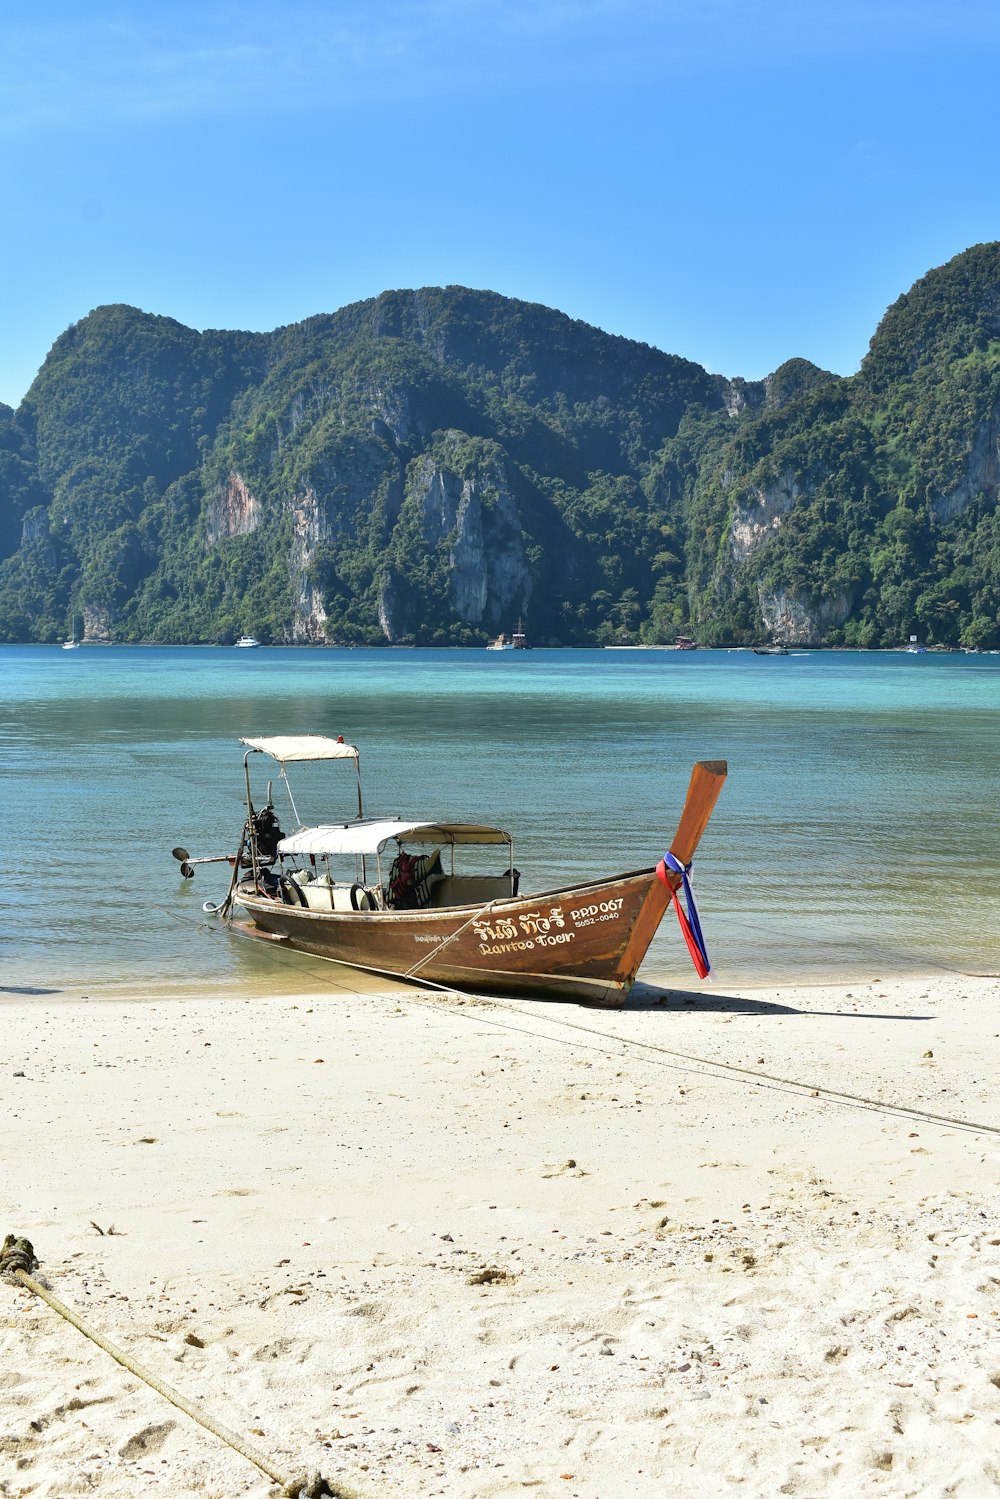 a boat on a beach with mountains in the background